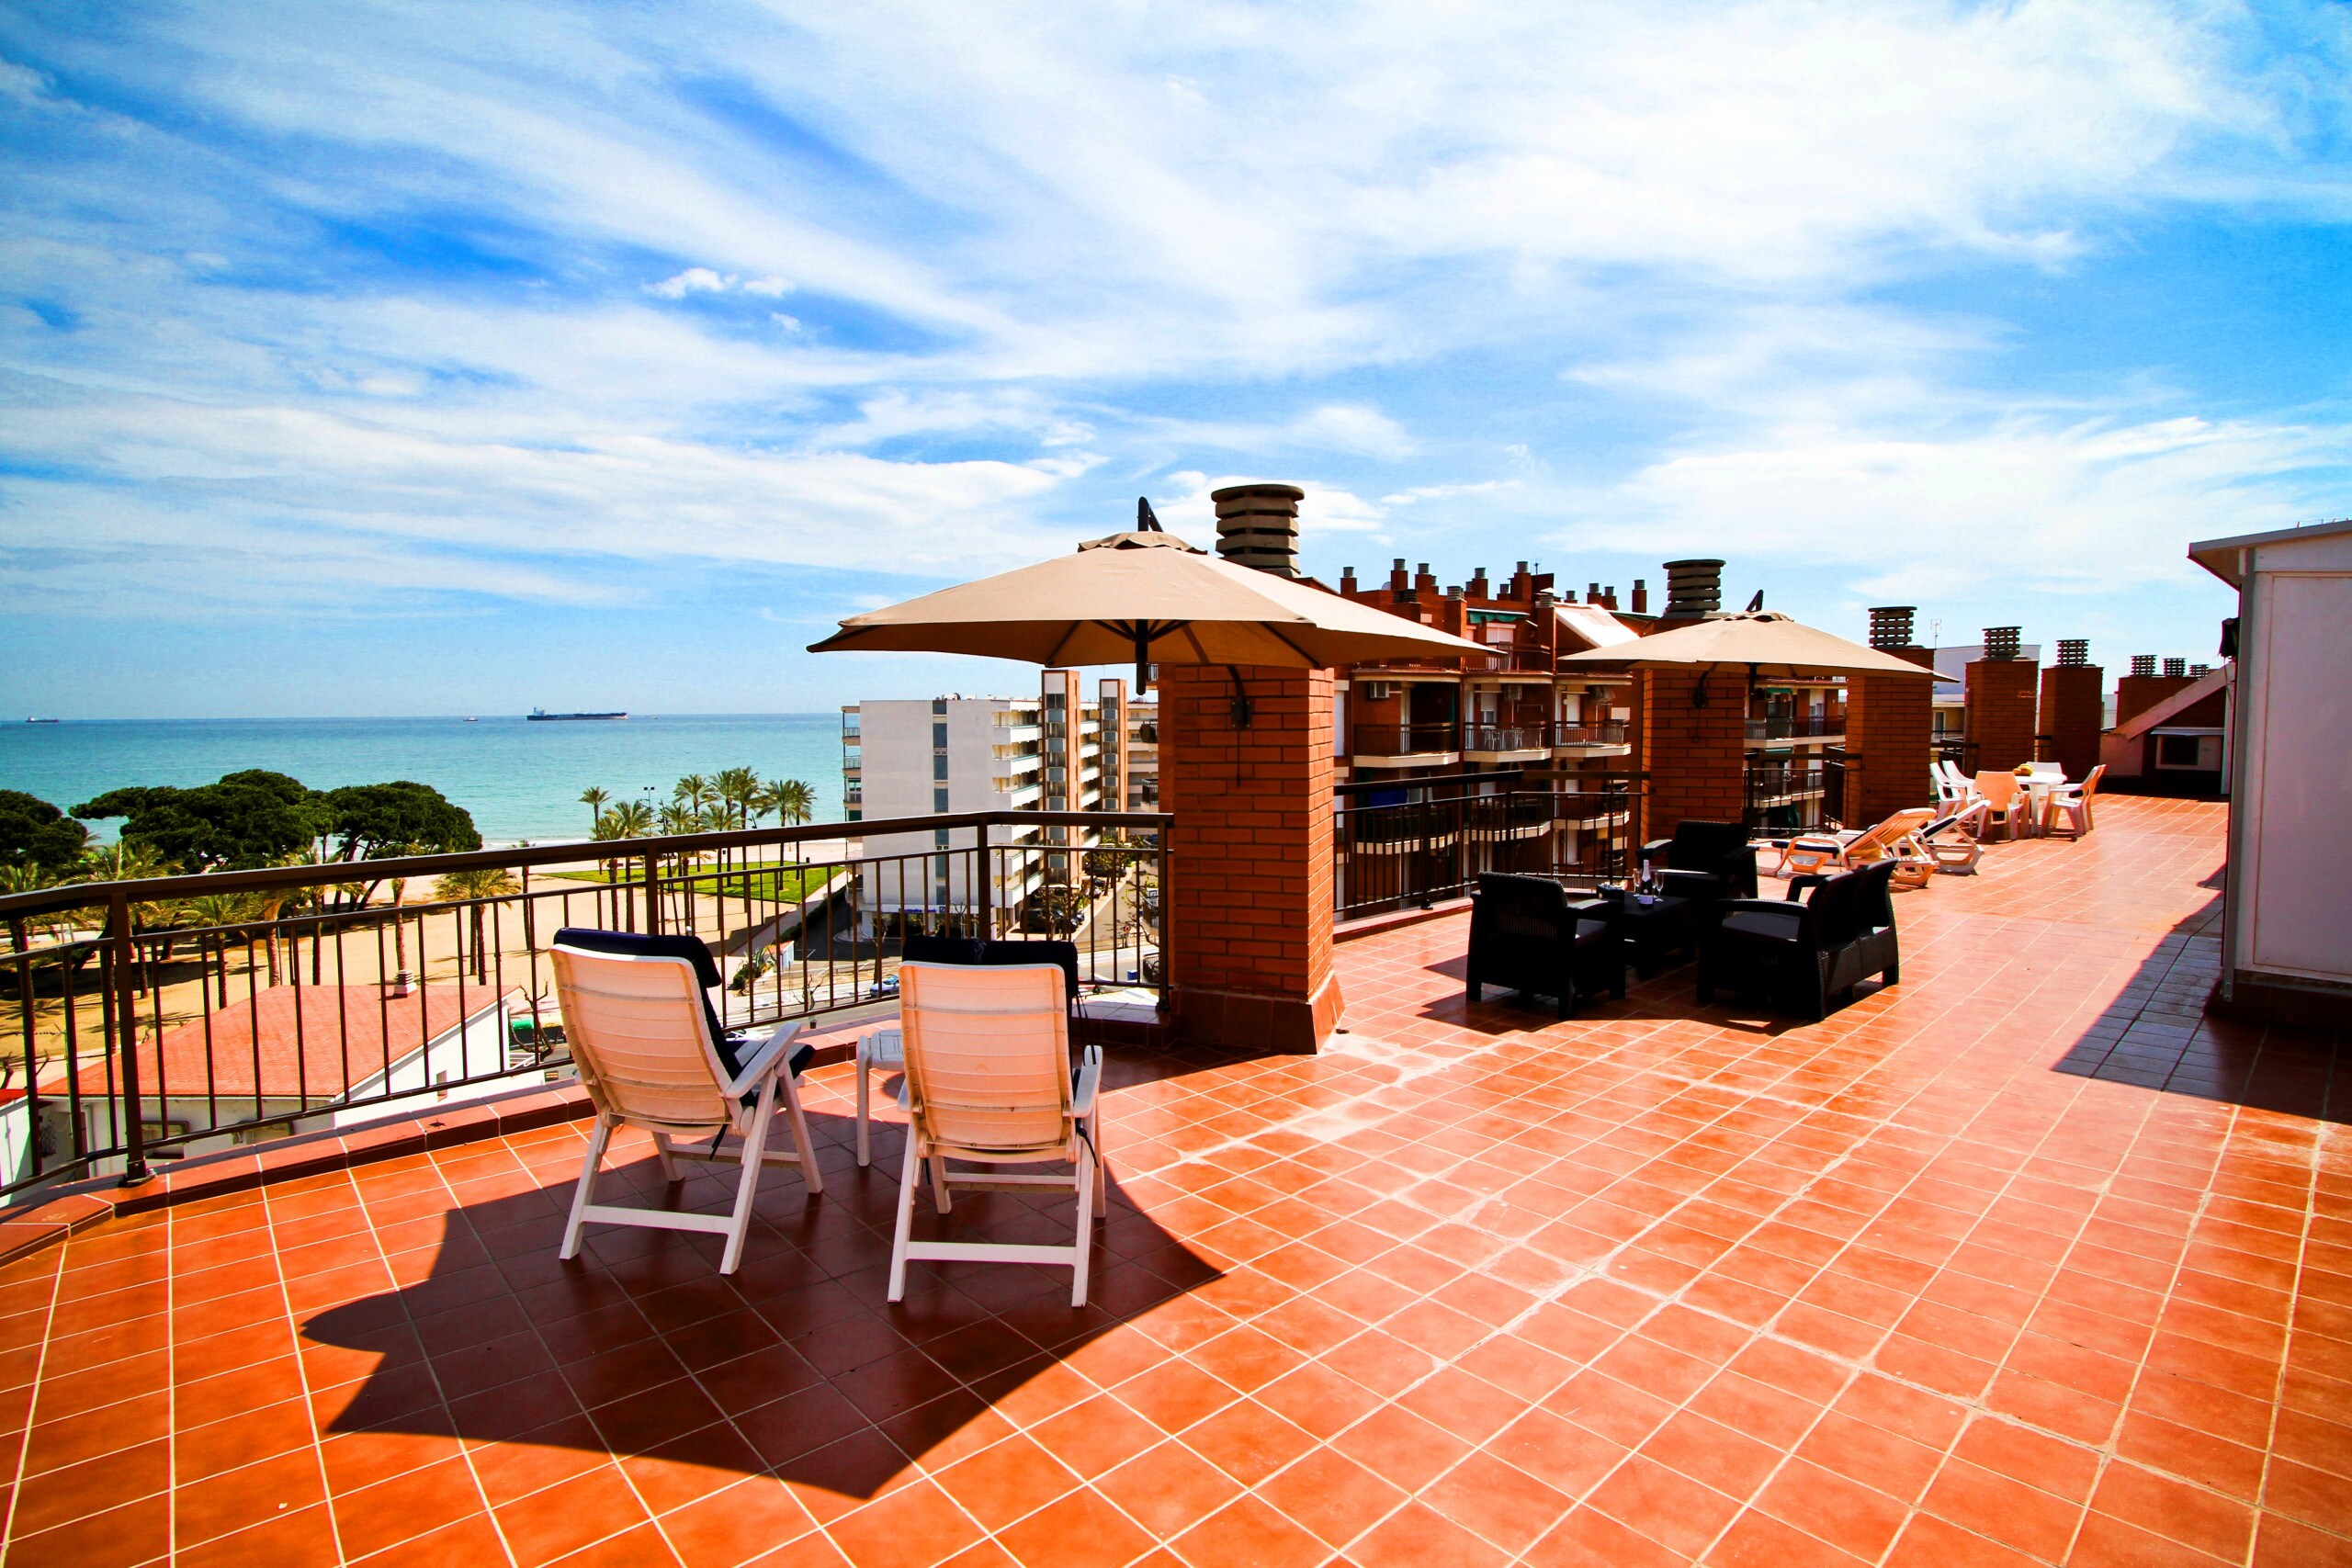 Property Image 1 - Fantastic apartment with seaview terrace at 50m from the beach in La Pineda